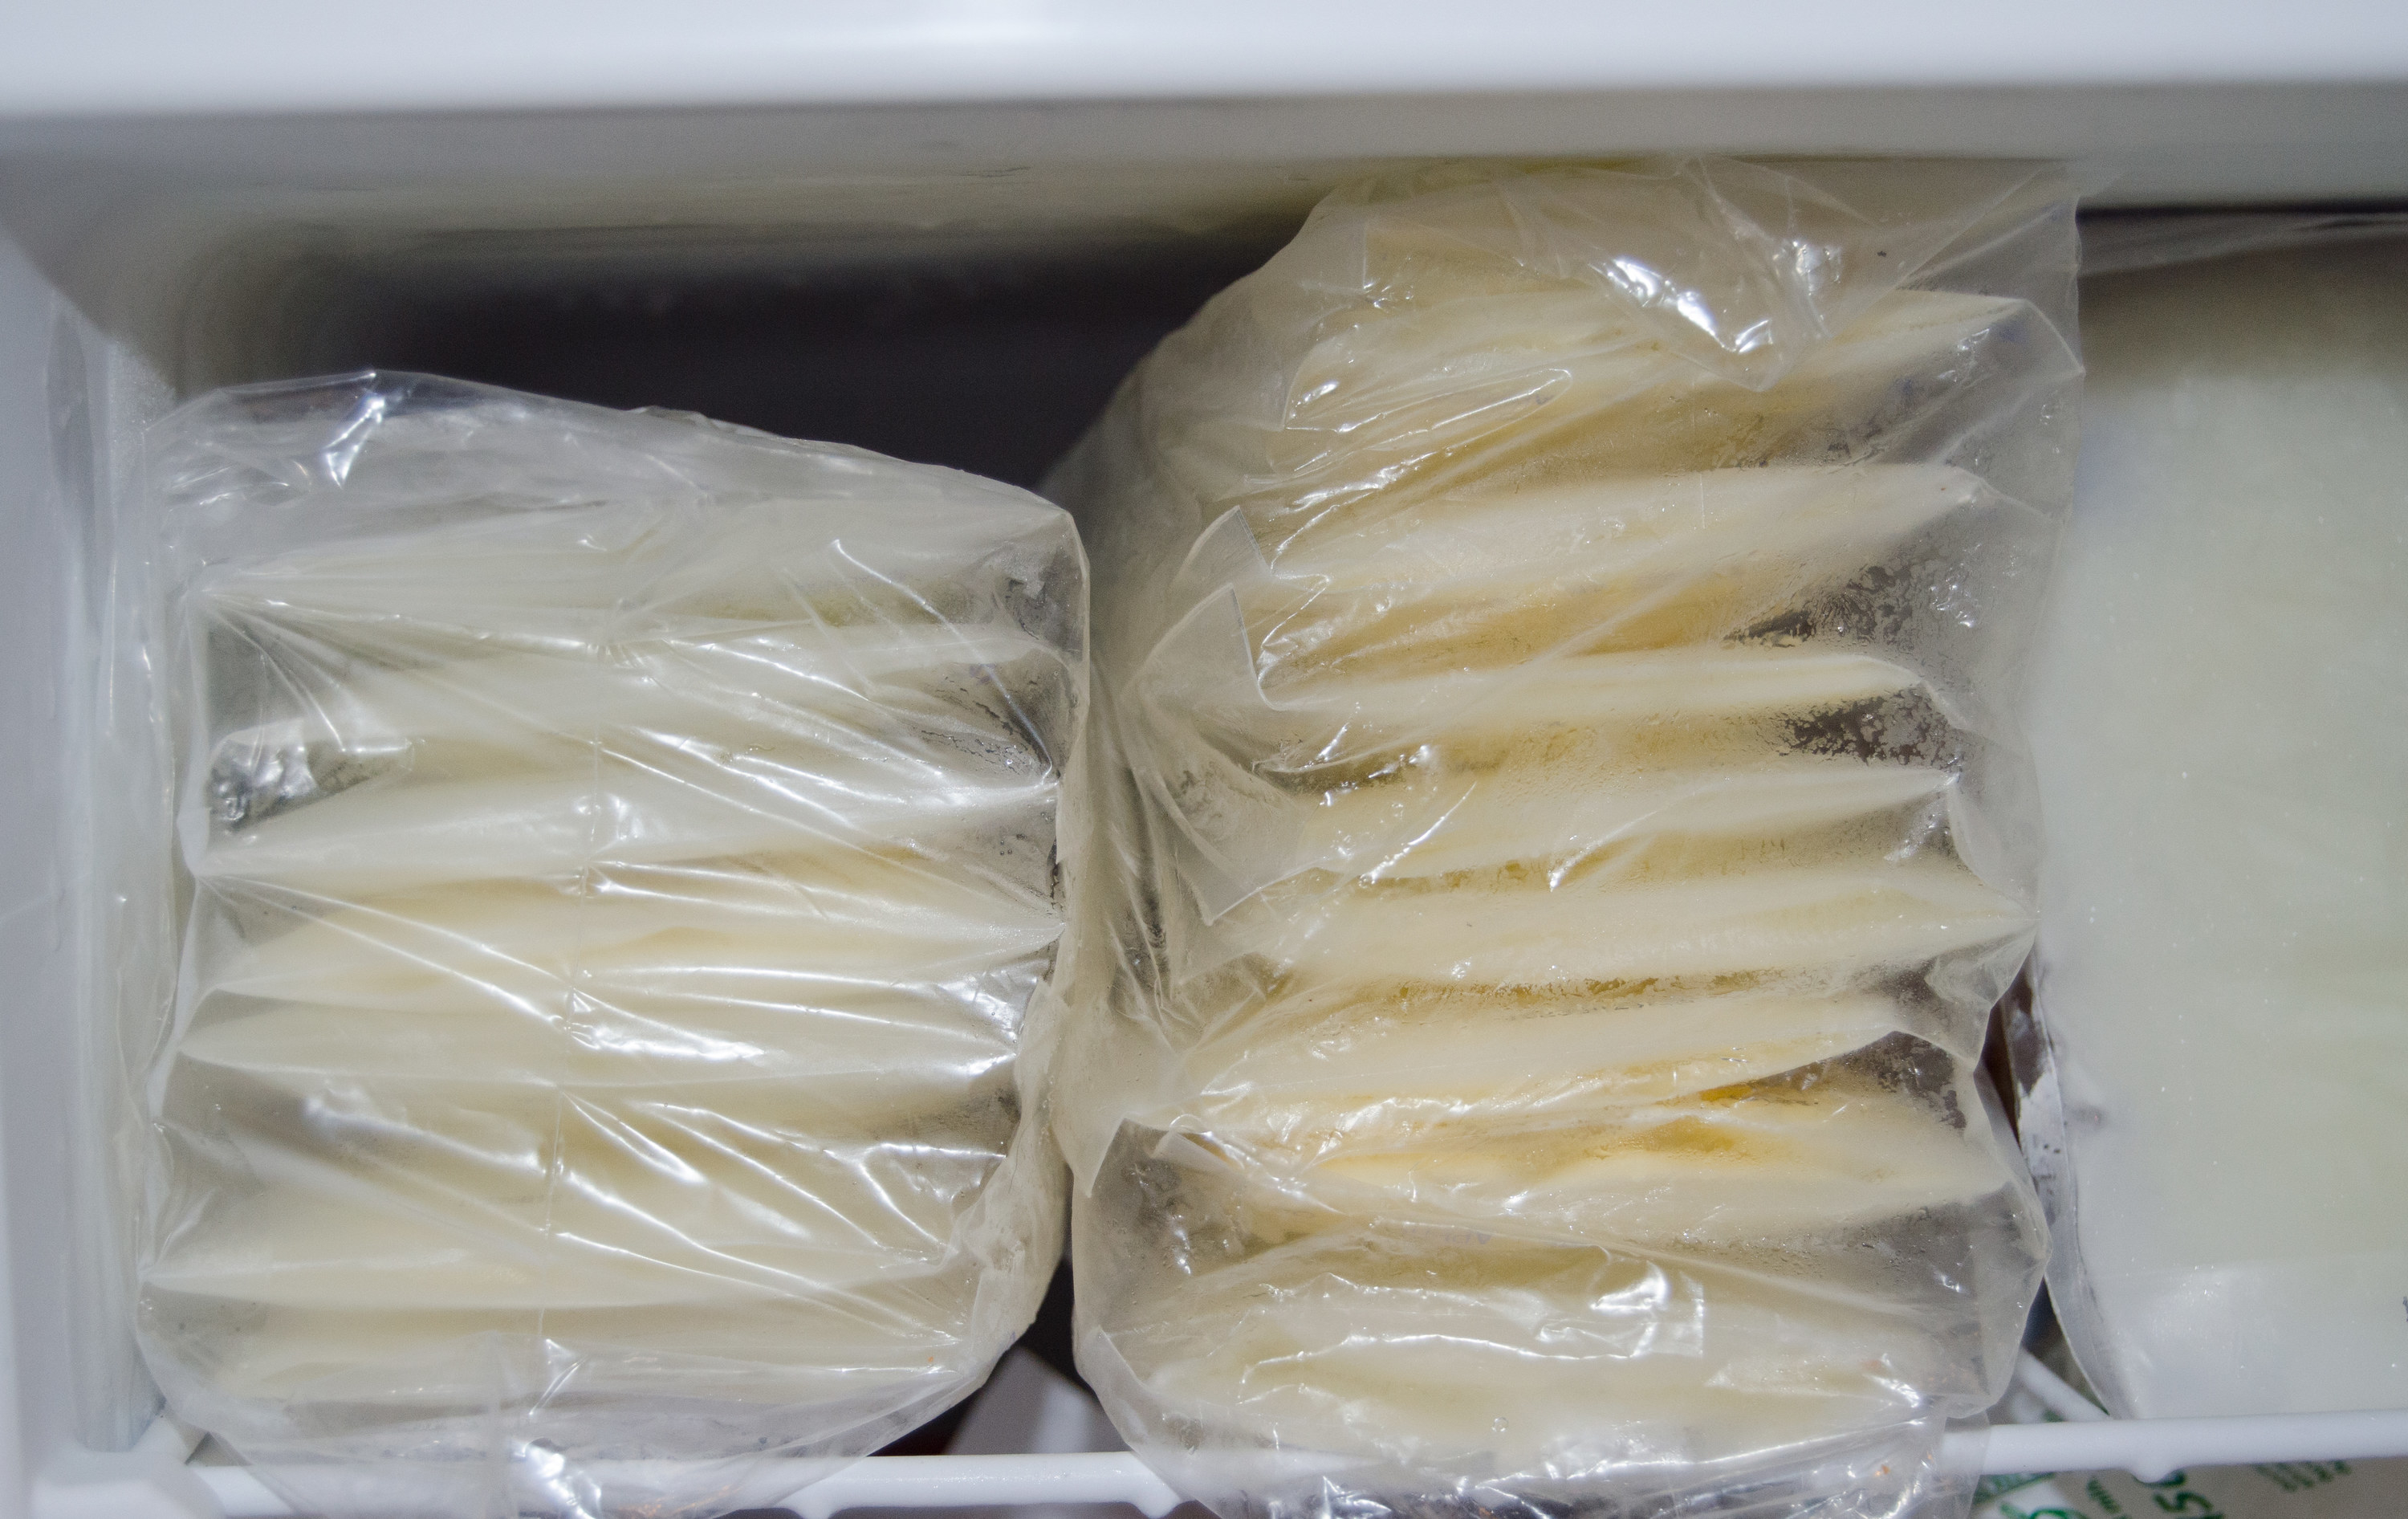 expressed breast milk packed in storage bags and frozen in the freezer